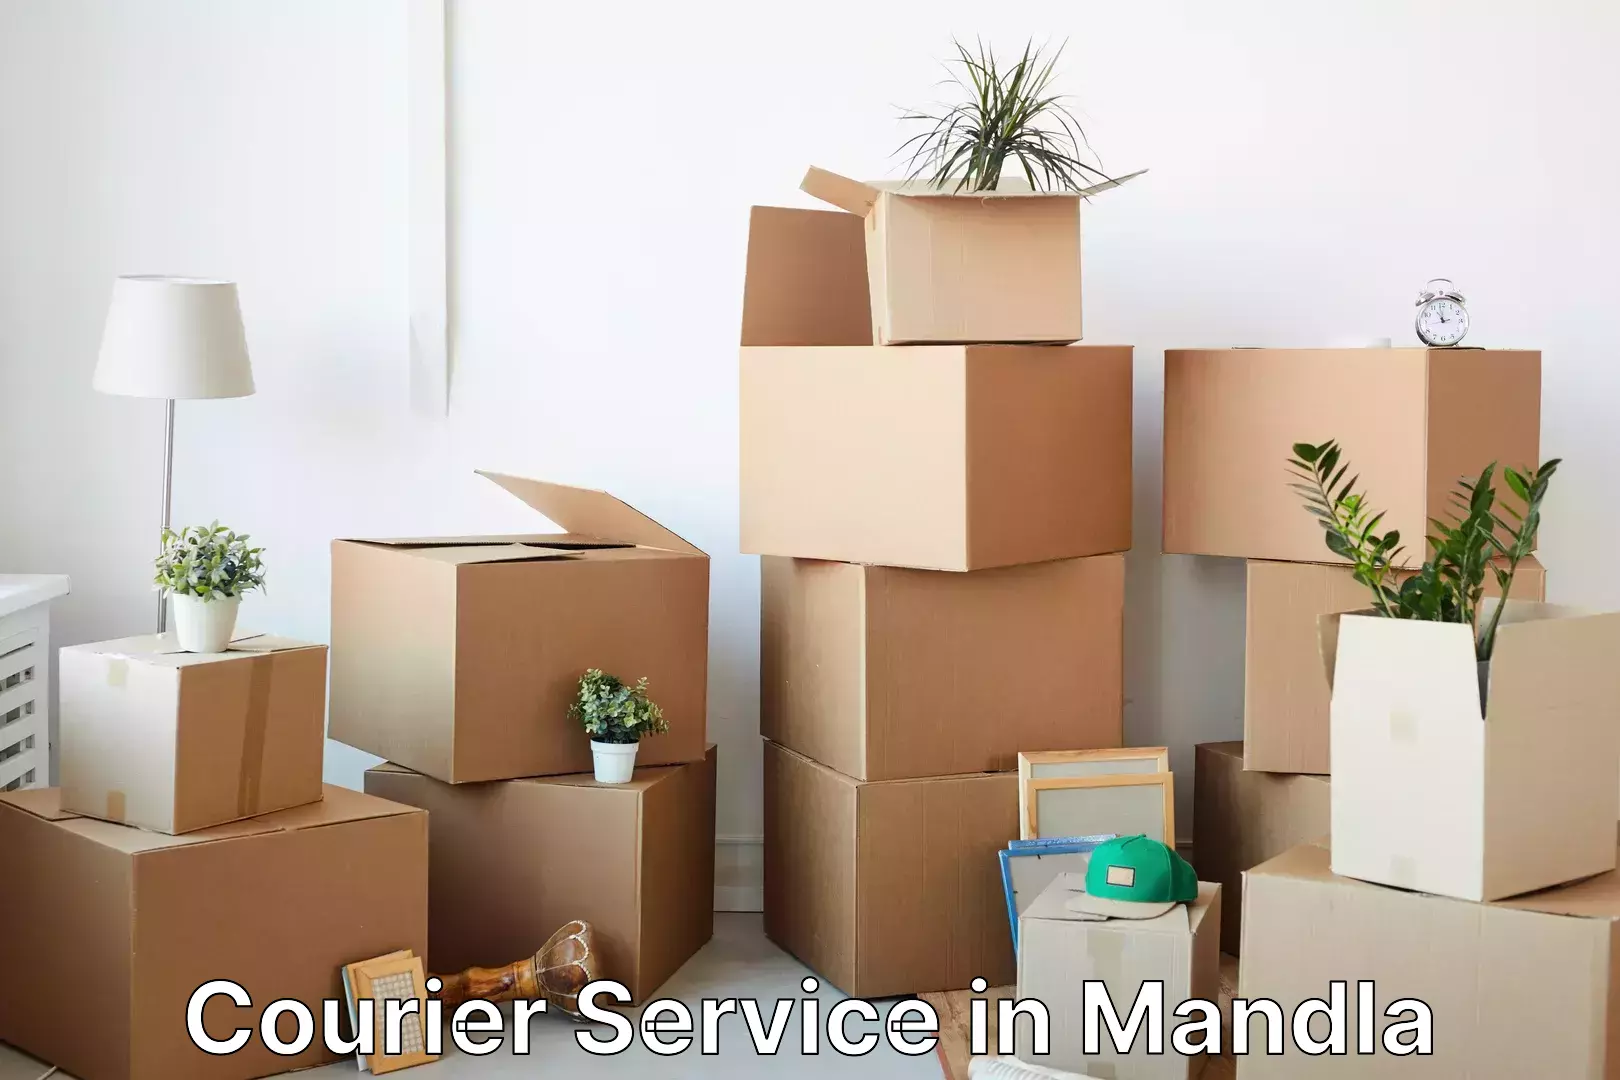 24-hour delivery options in Mandla